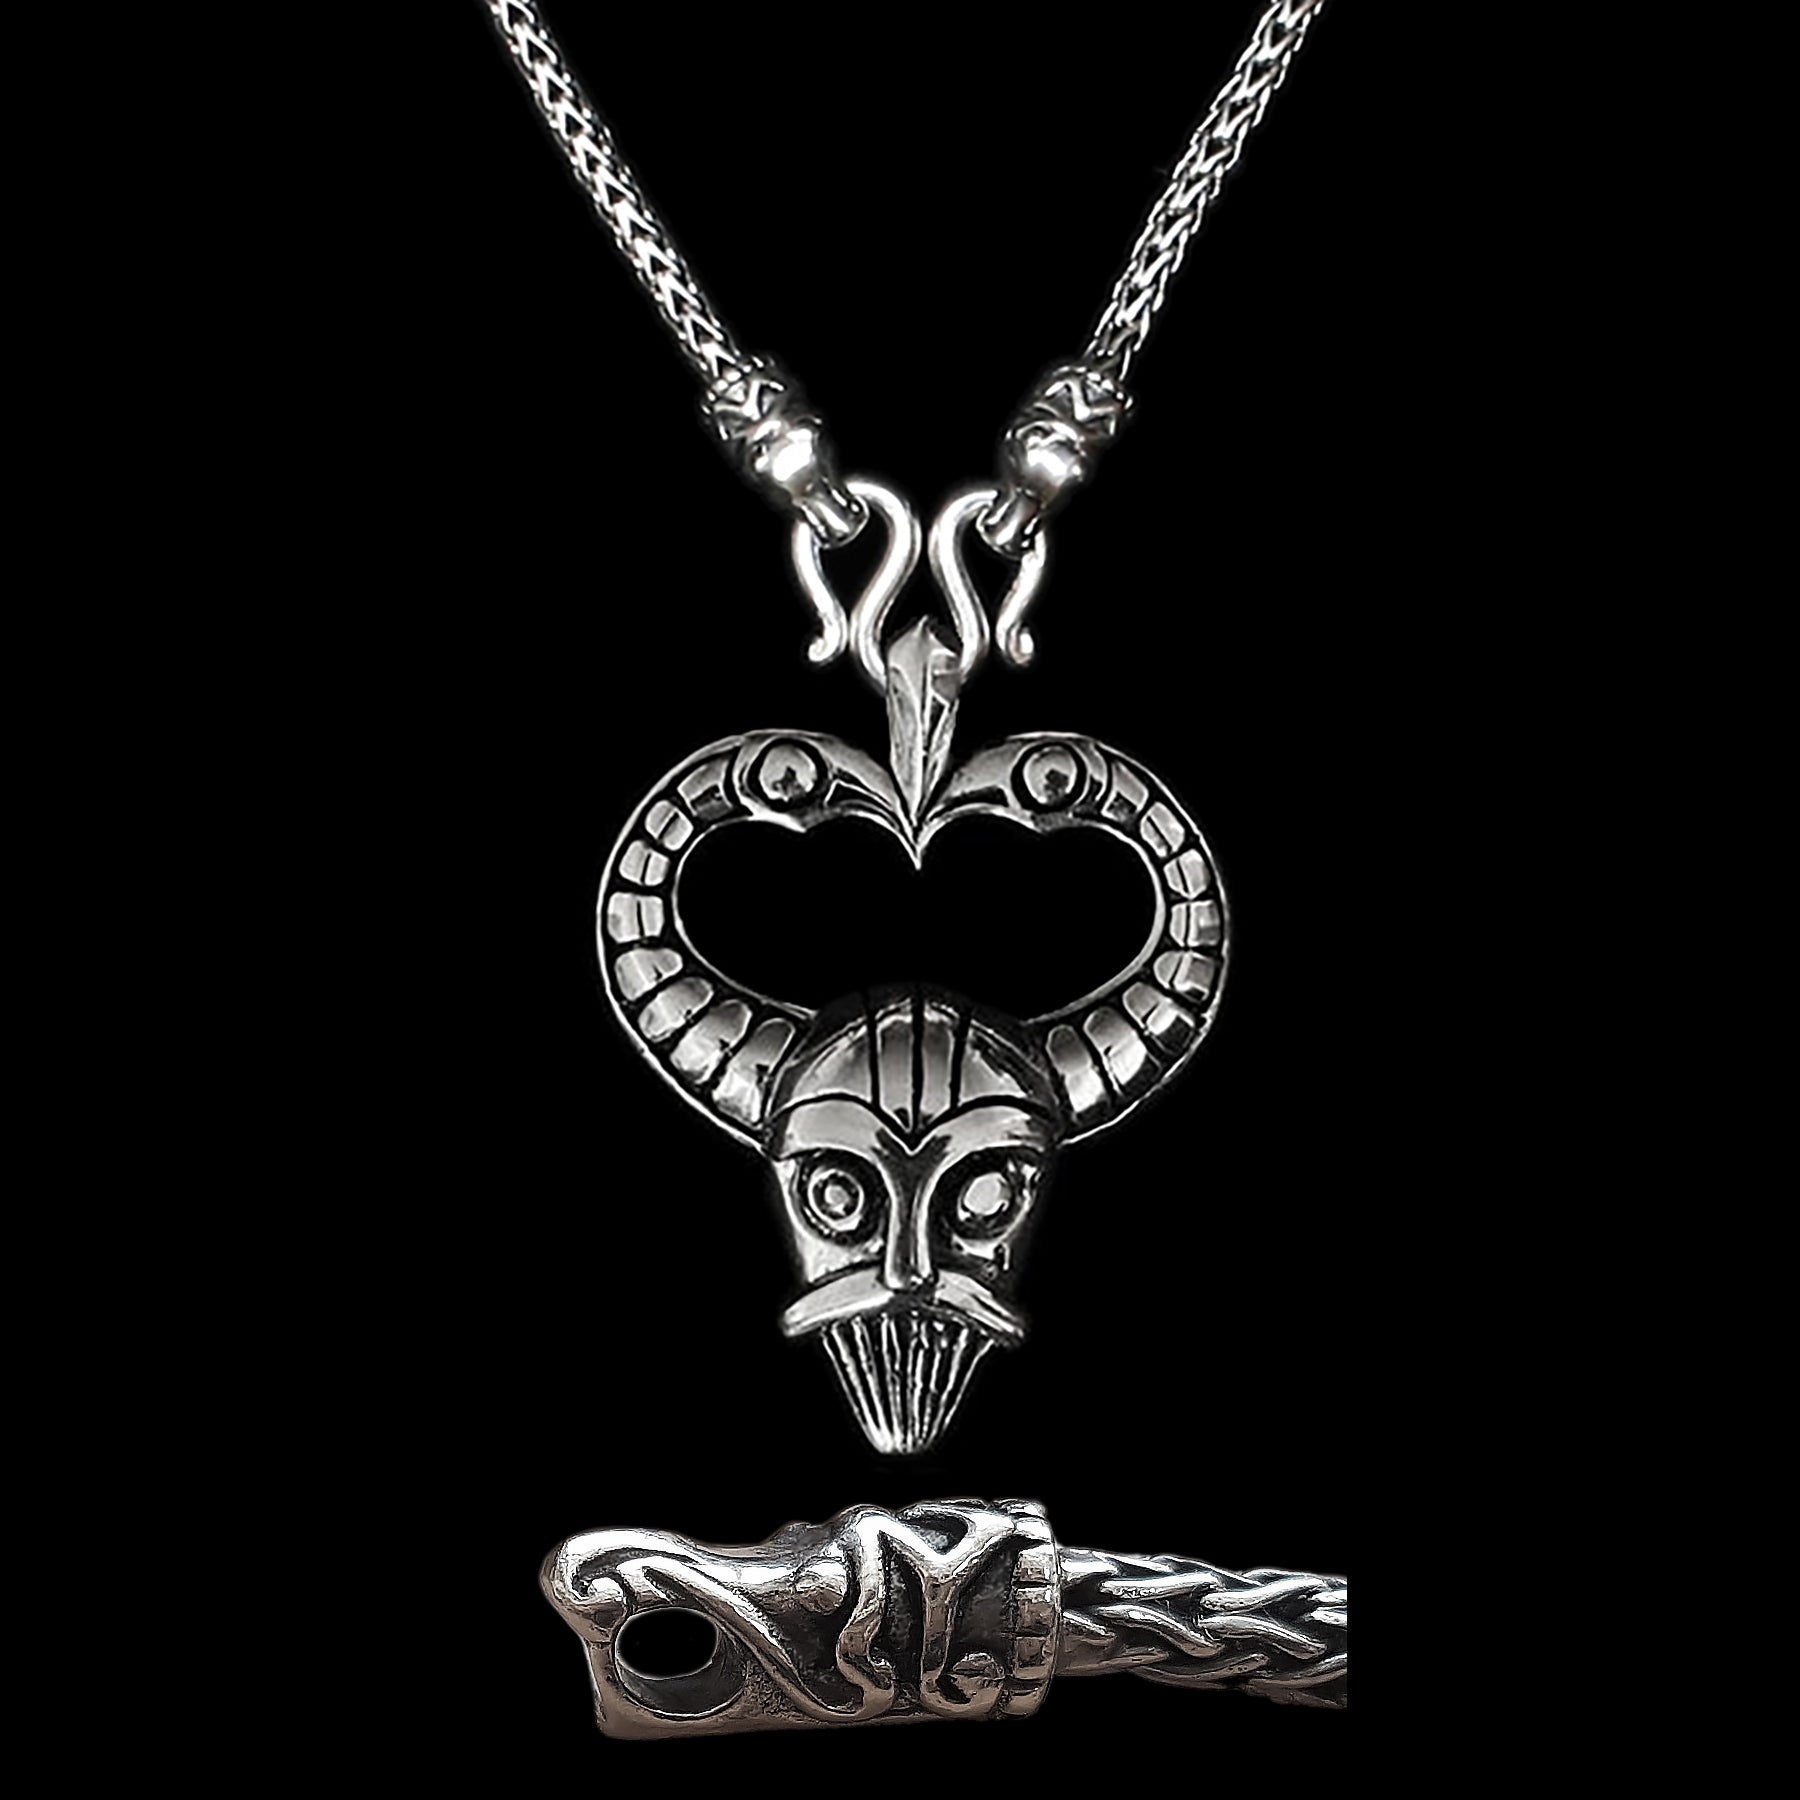 Sterling Silver Viking Snake Chain Necklace with Gotlandic Dragon Heads & Odin Mask Pendant